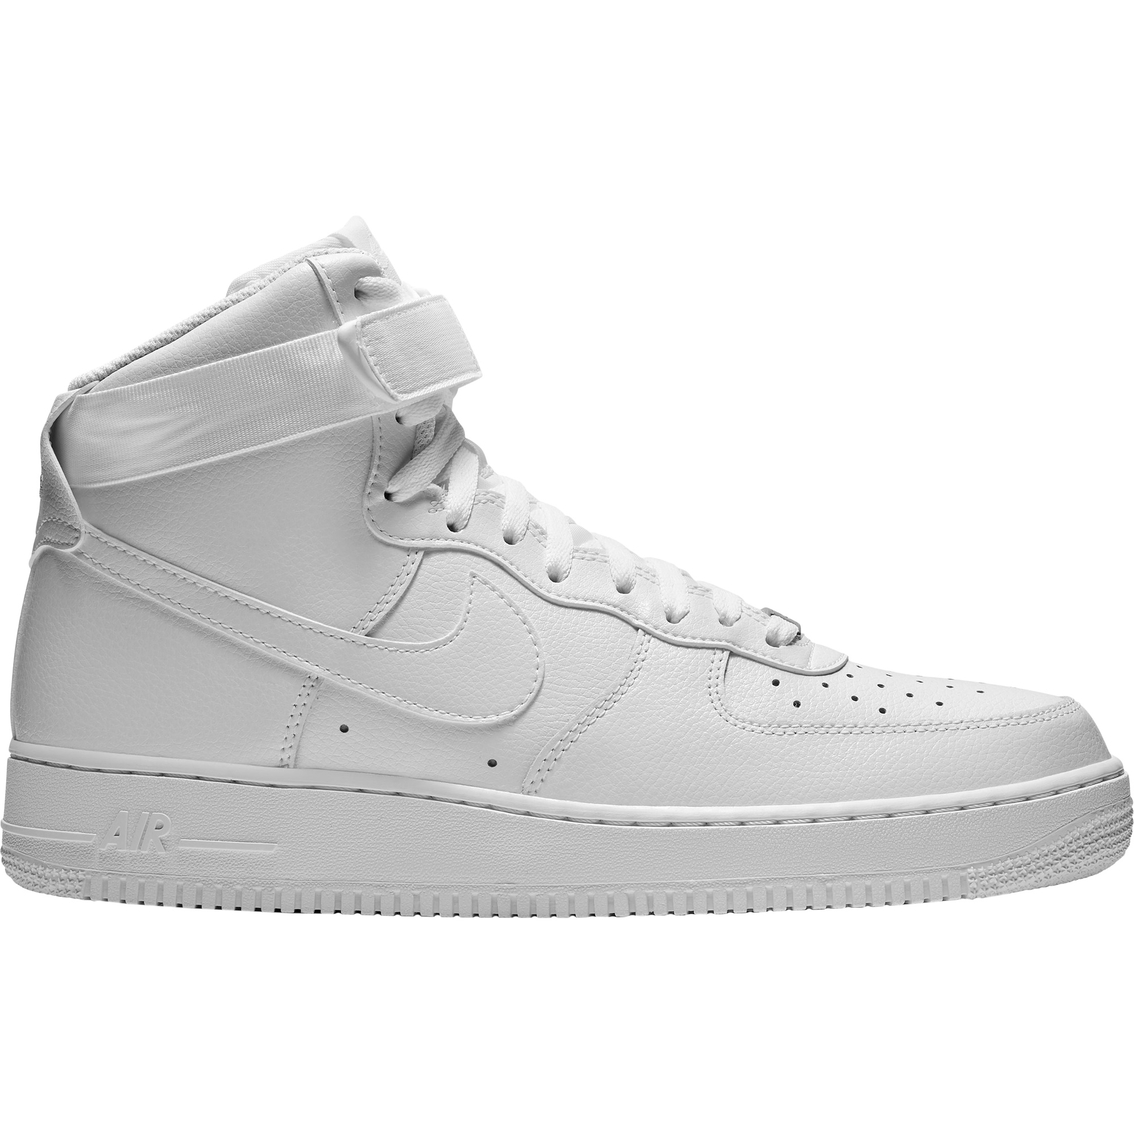 Nike Men's Air Force 1 High '07 Shoe | Men's Athletic Shoes | Father's ...